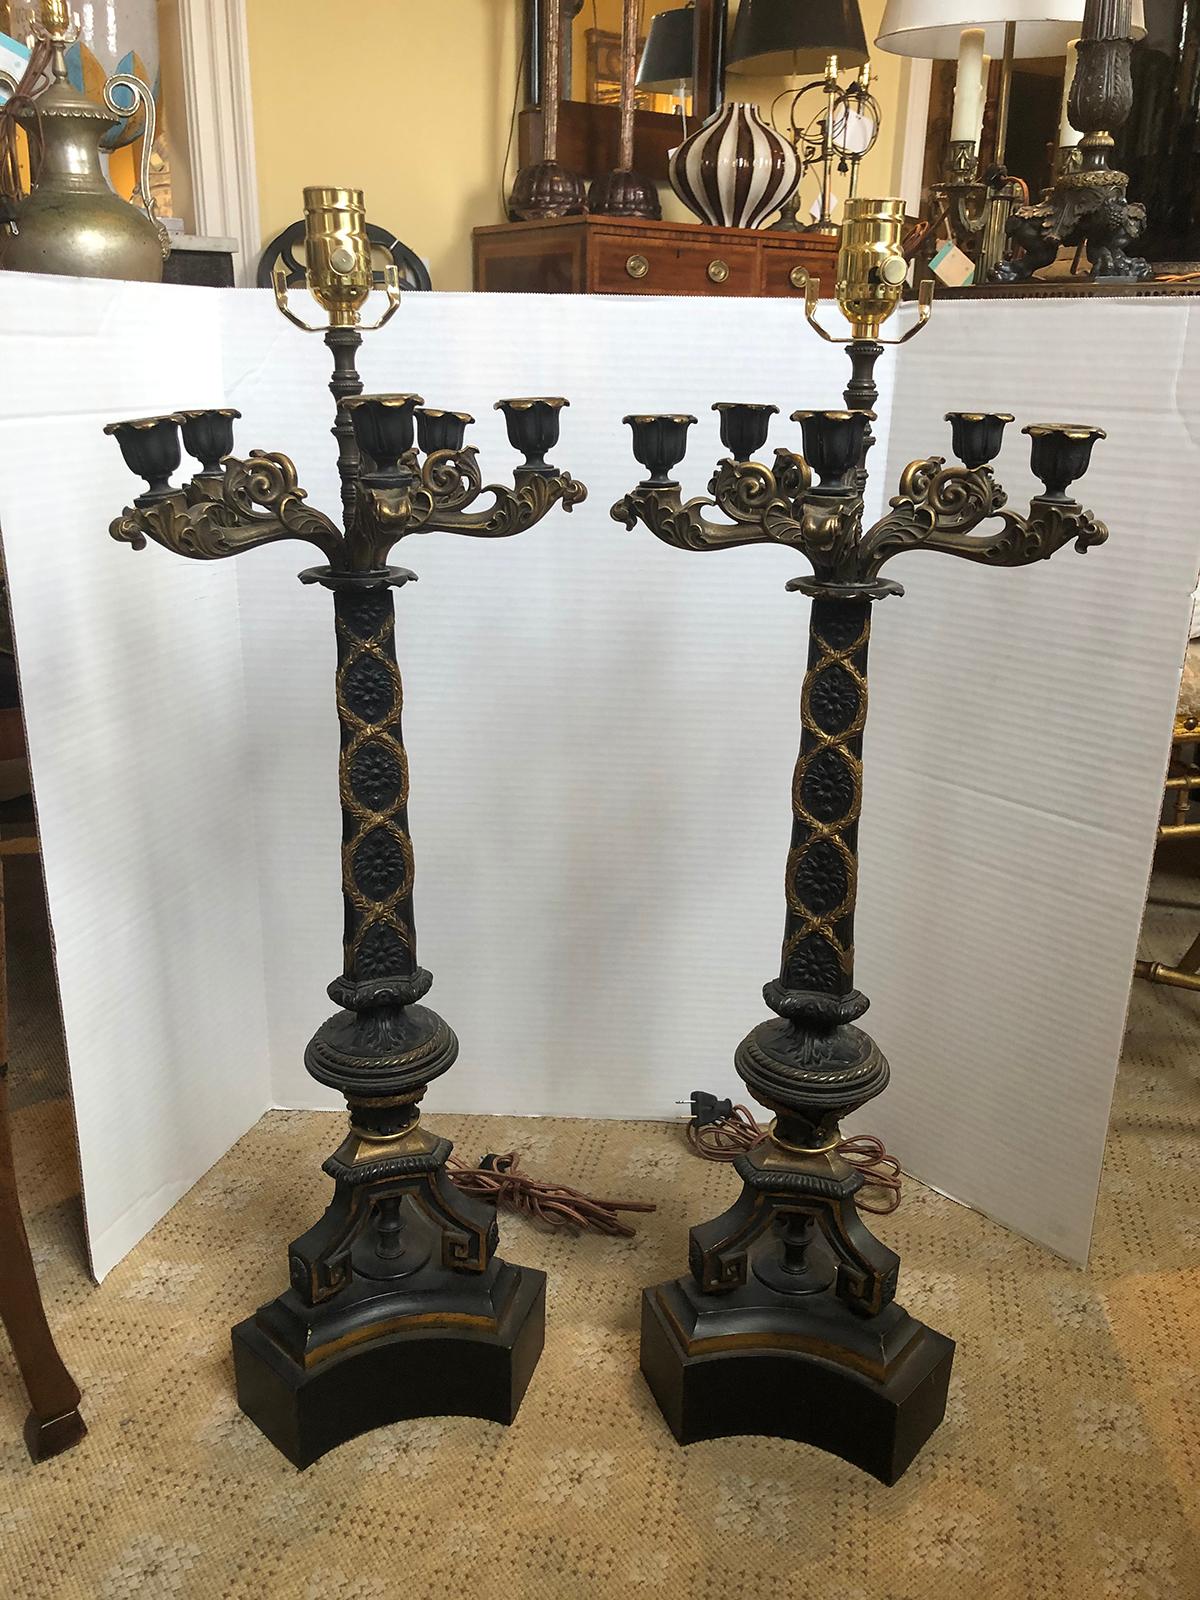 Pair of 20th century bronze and gilt five-arm candelabra as lamps
New wiring.